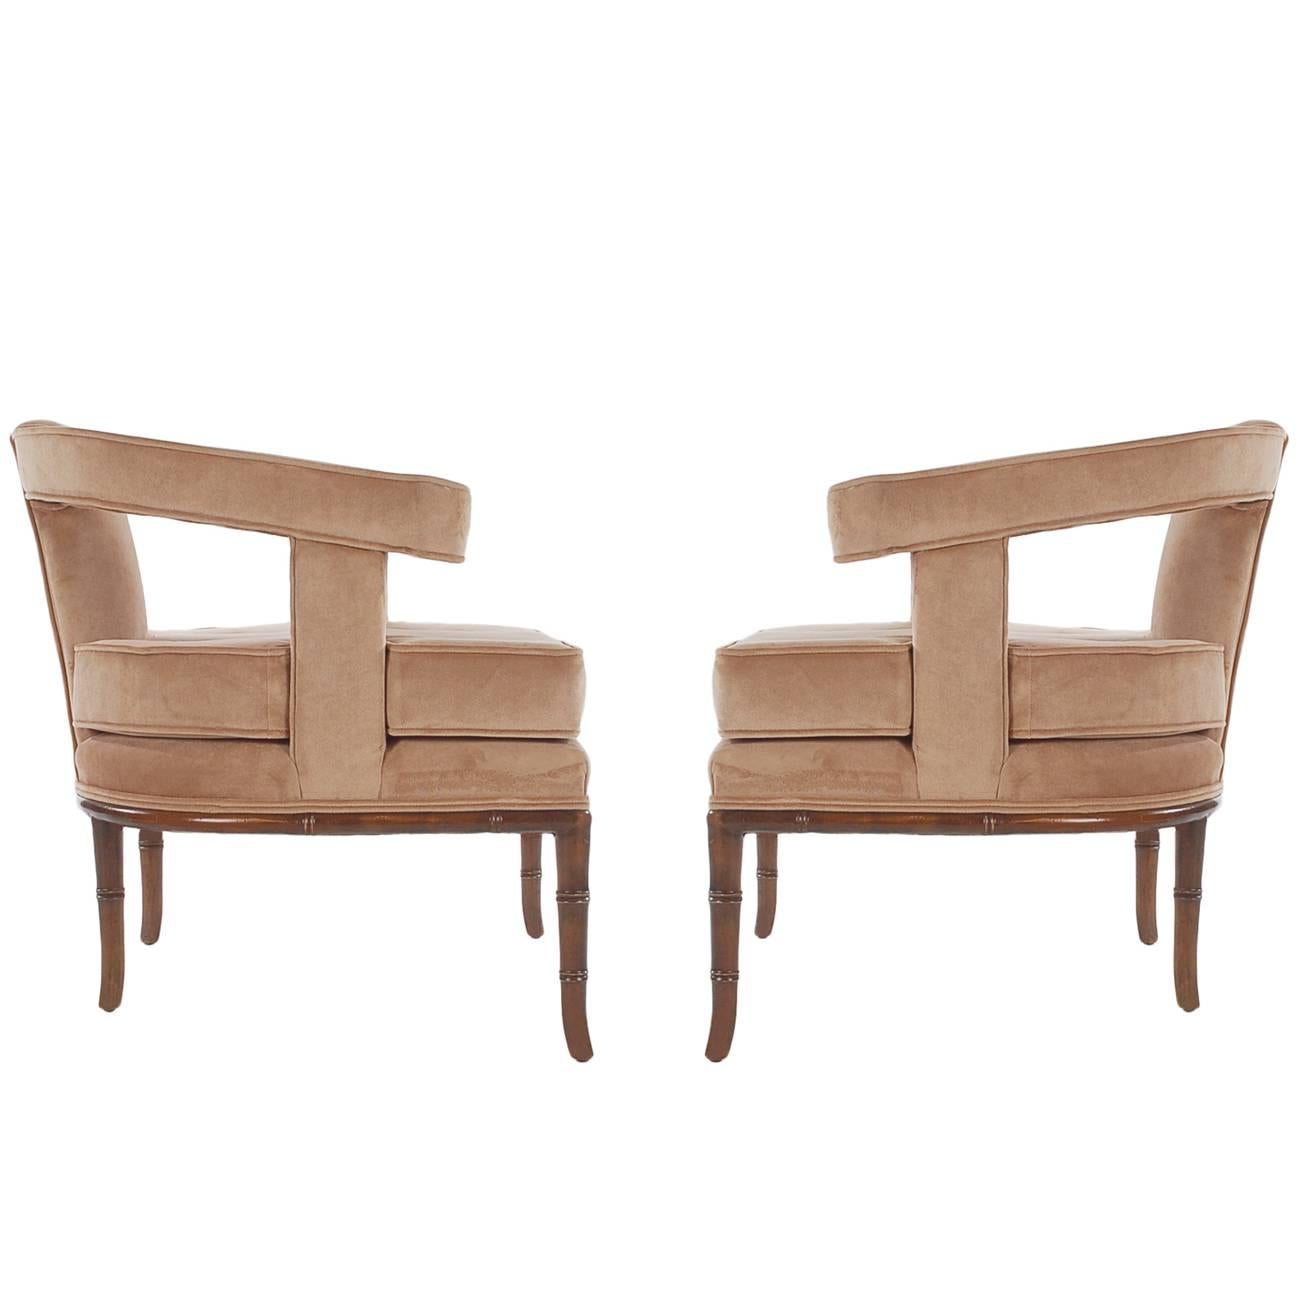 Pair of Mid-Century Velvet Lounge Chairs after Harvey Probber or James Mont